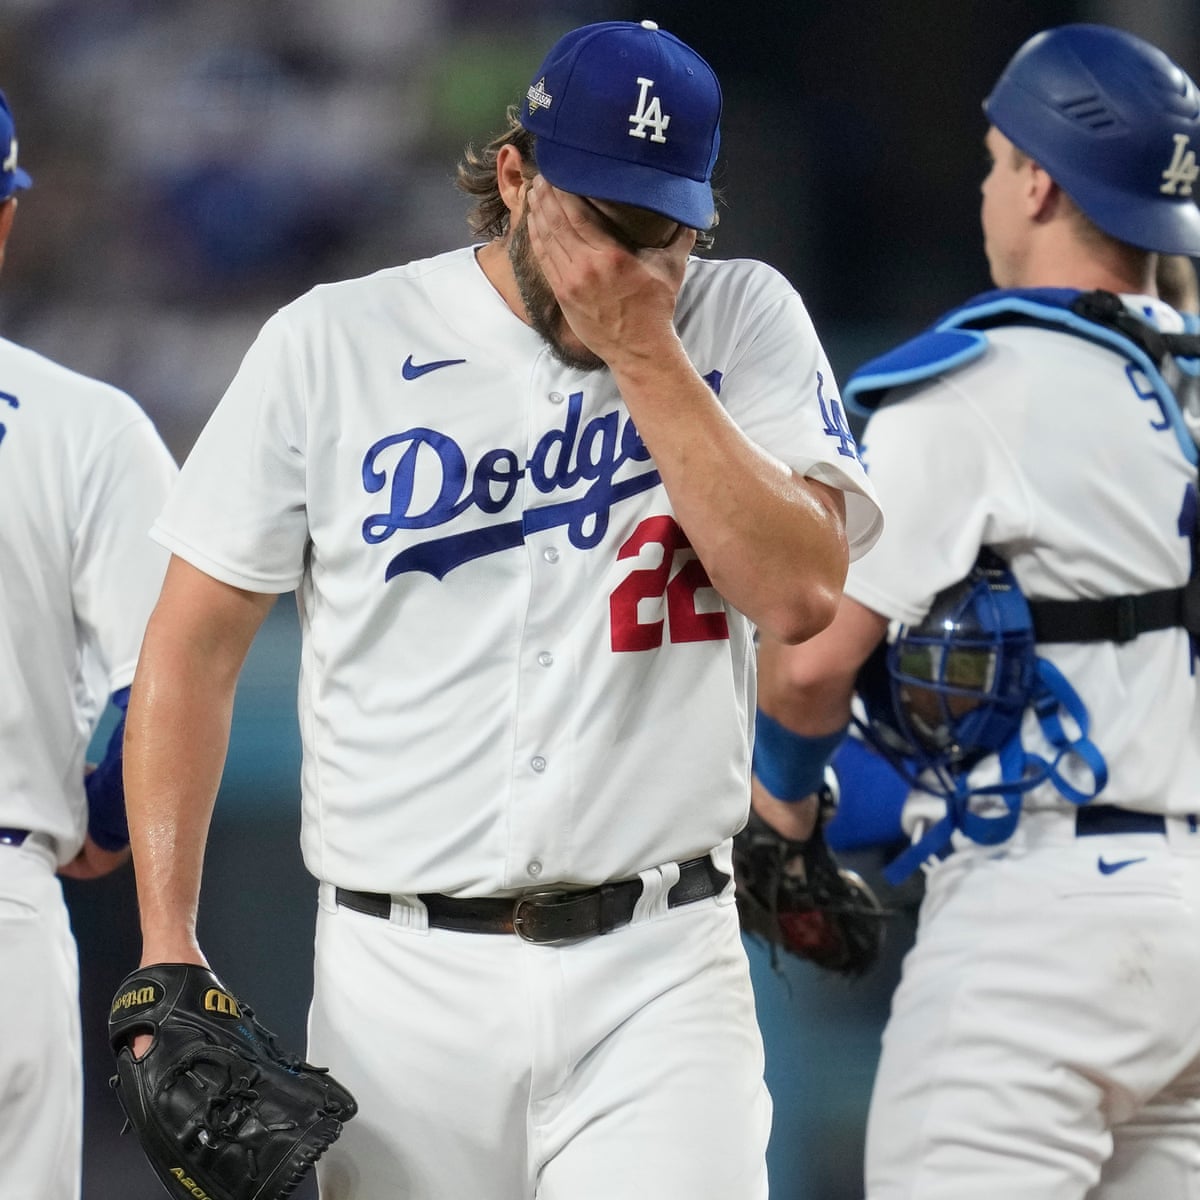 Just bad pitching': Kershaw pulled after six-run first inning in